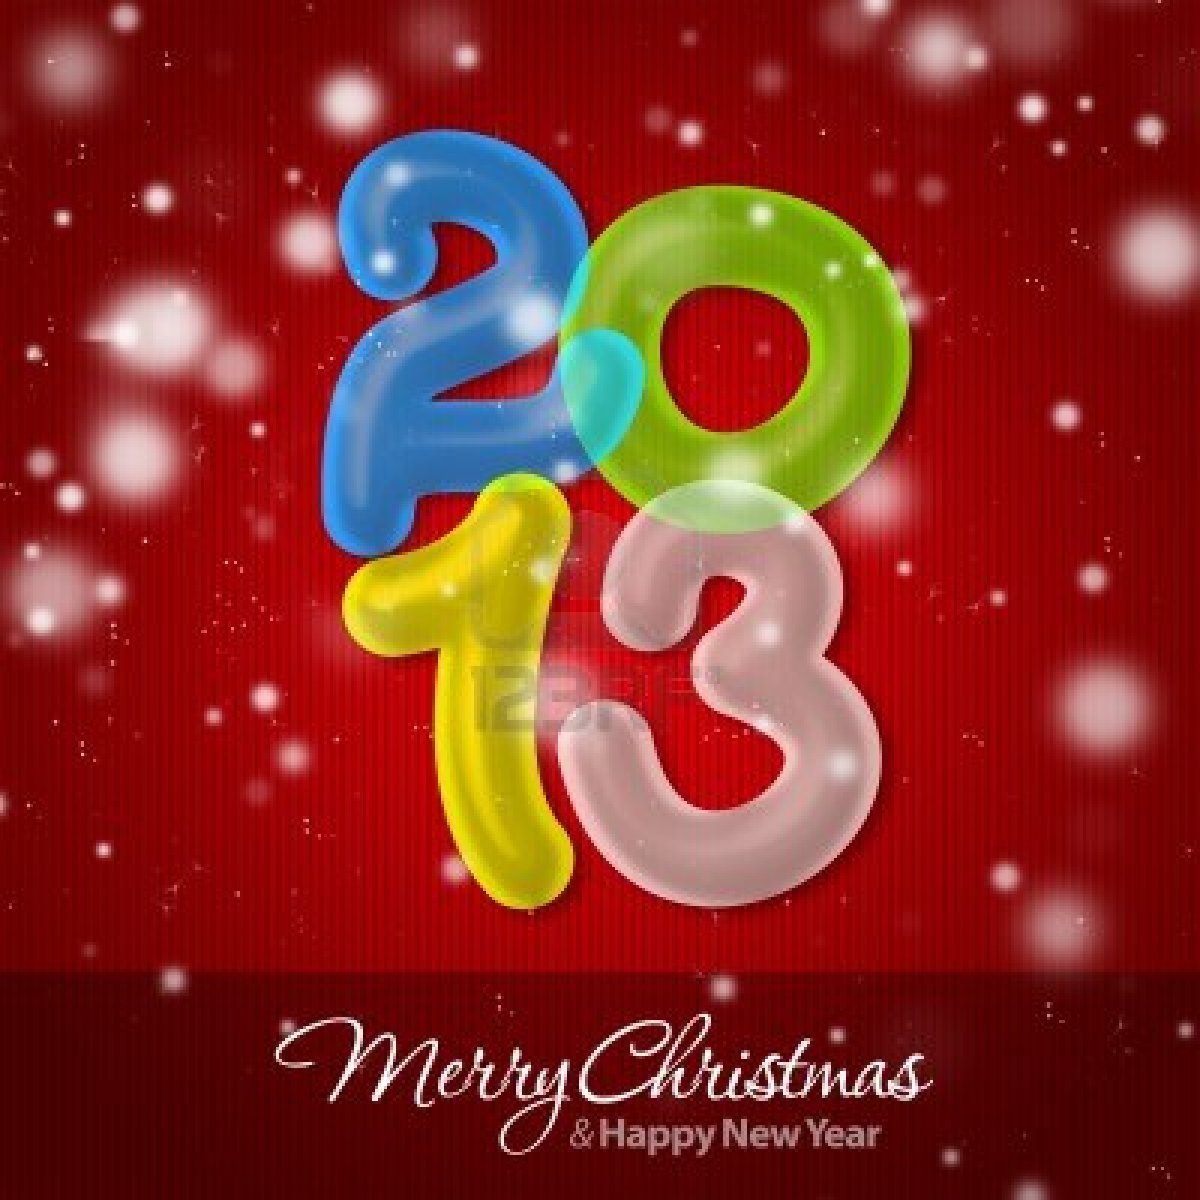 http://mistonline.in/wp/16241124-merry-christmas-and-happy-new-year-2013-greeting-card.jpg